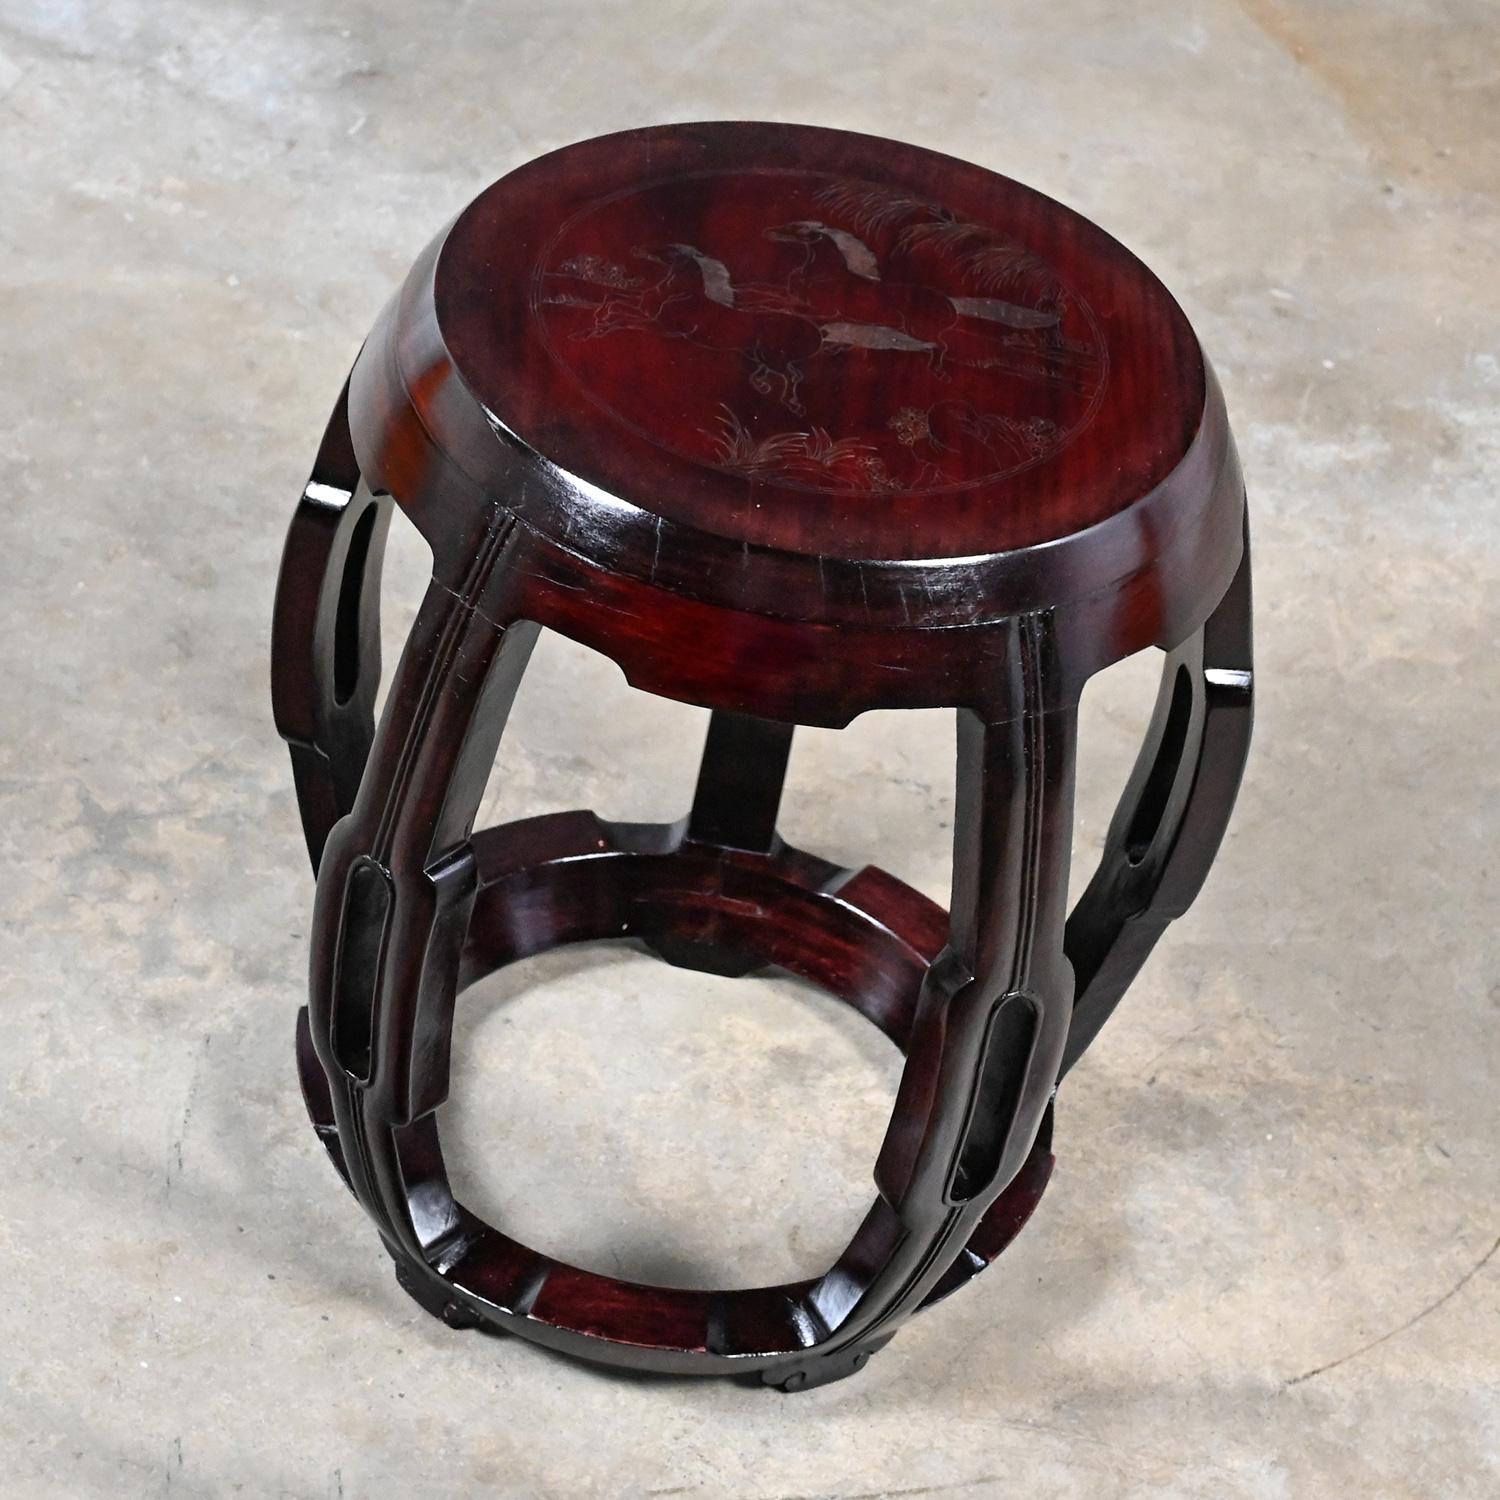 Mid 20th Century Chinoiserie Asian Rosewood Barrel Drum Table or Garden Stool For Sale 10